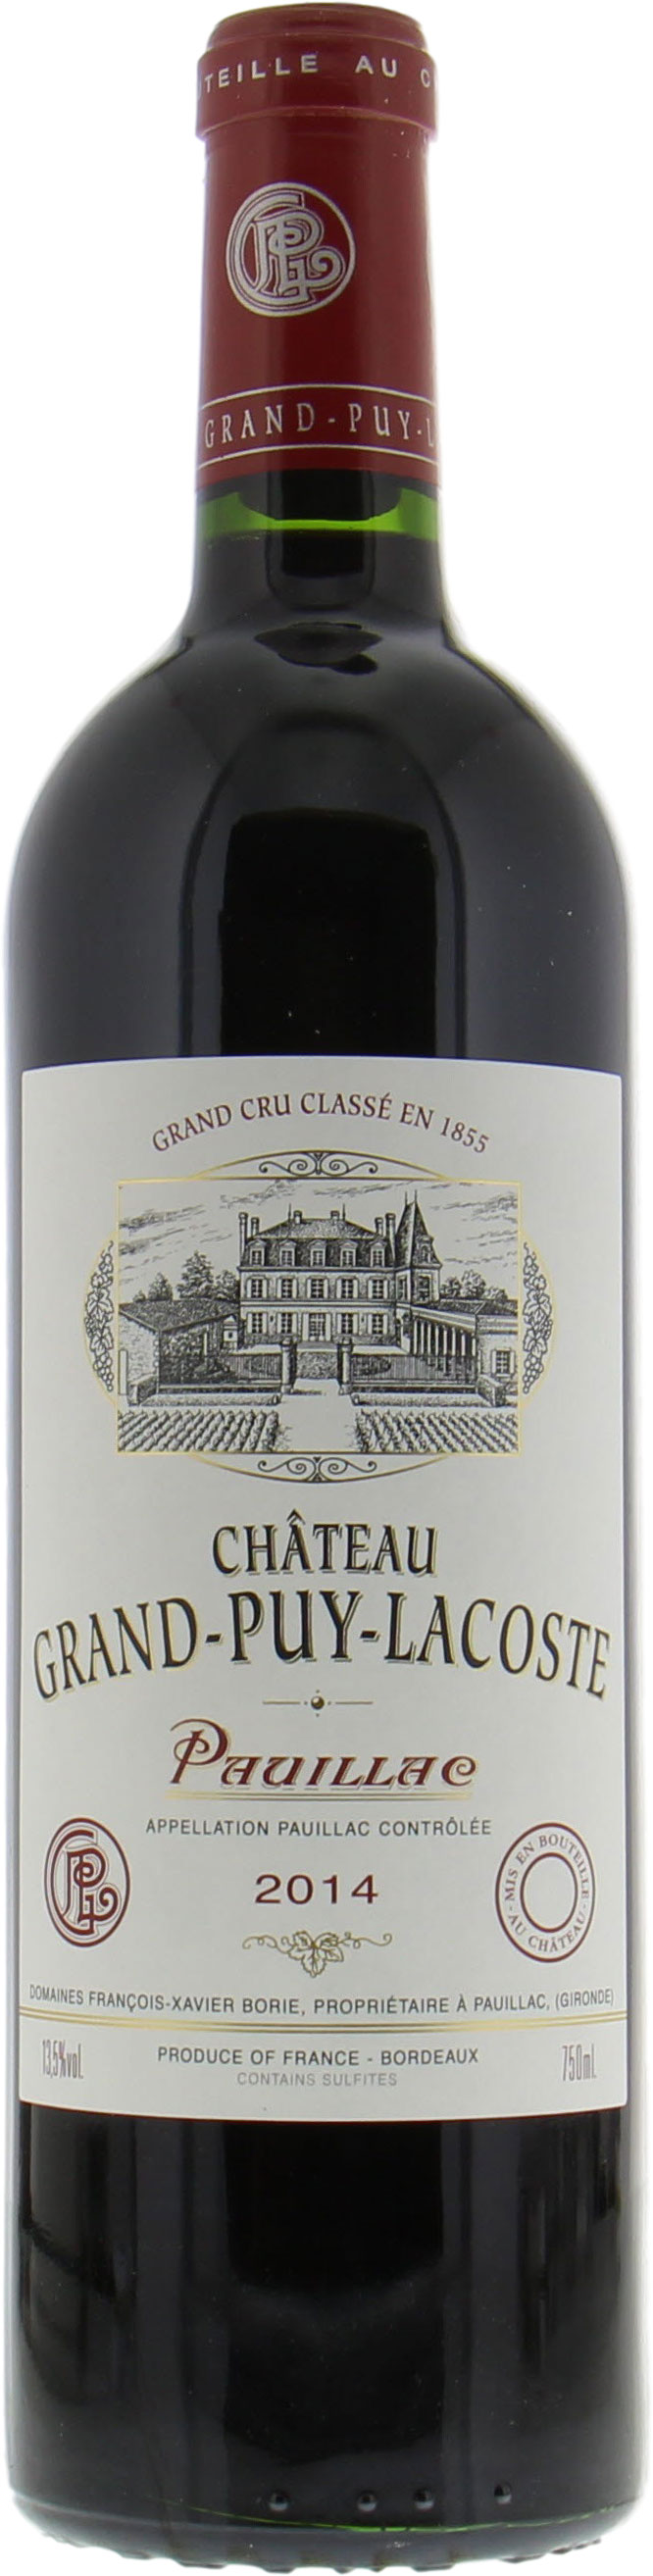 Chateau Grand Puy Lacoste - Chateau Grand Puy Lacoste 2014 Perfect